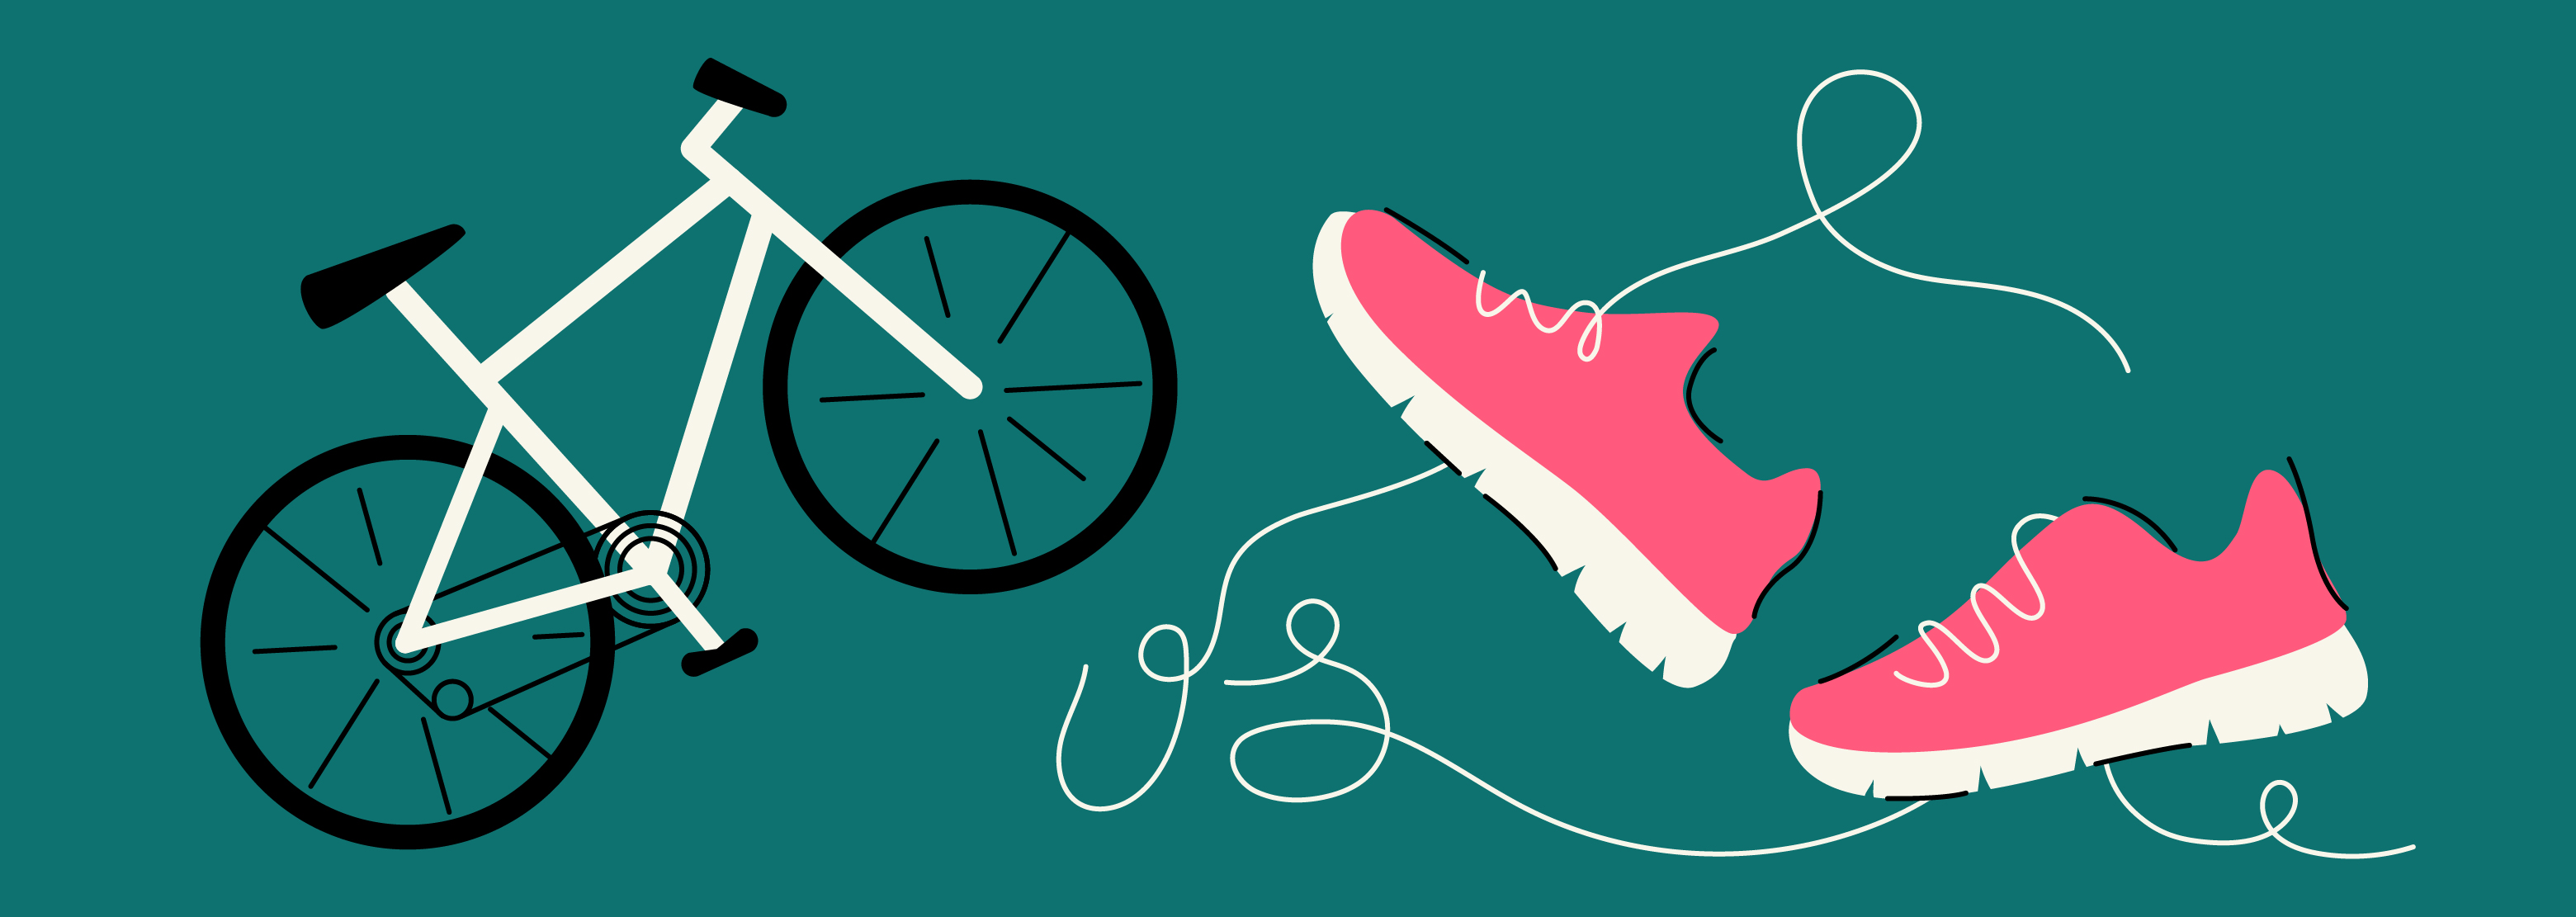 Biking vs. Running: Which Is Better for You and Why?